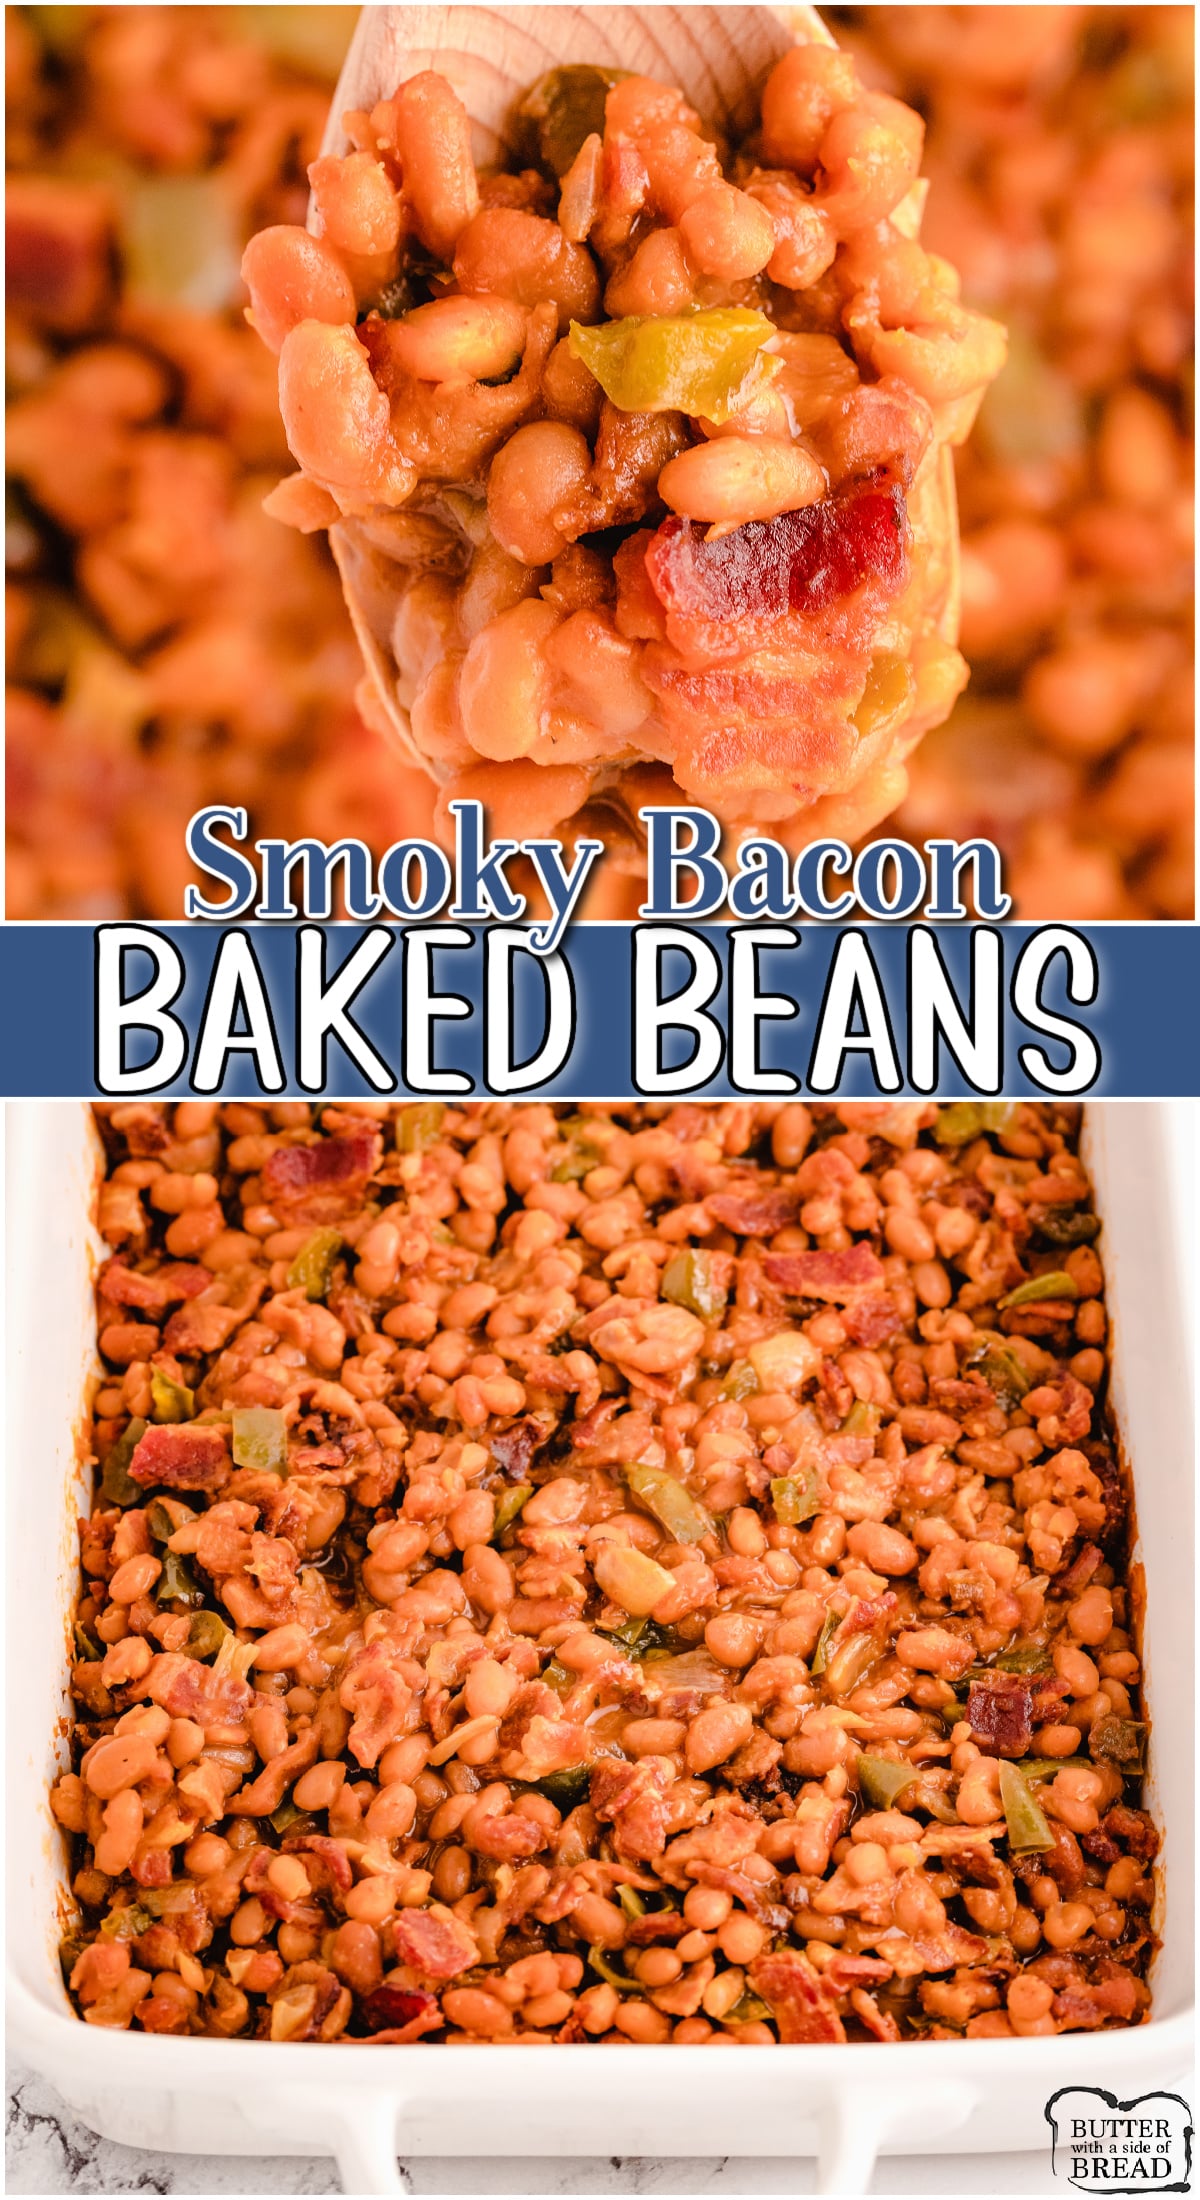 Baked Beans with Bacon are packed with a smoky blend of seasonings to compliment the savory bacon, beans & onions! Fantastic BBQ side dish perfect for summer!